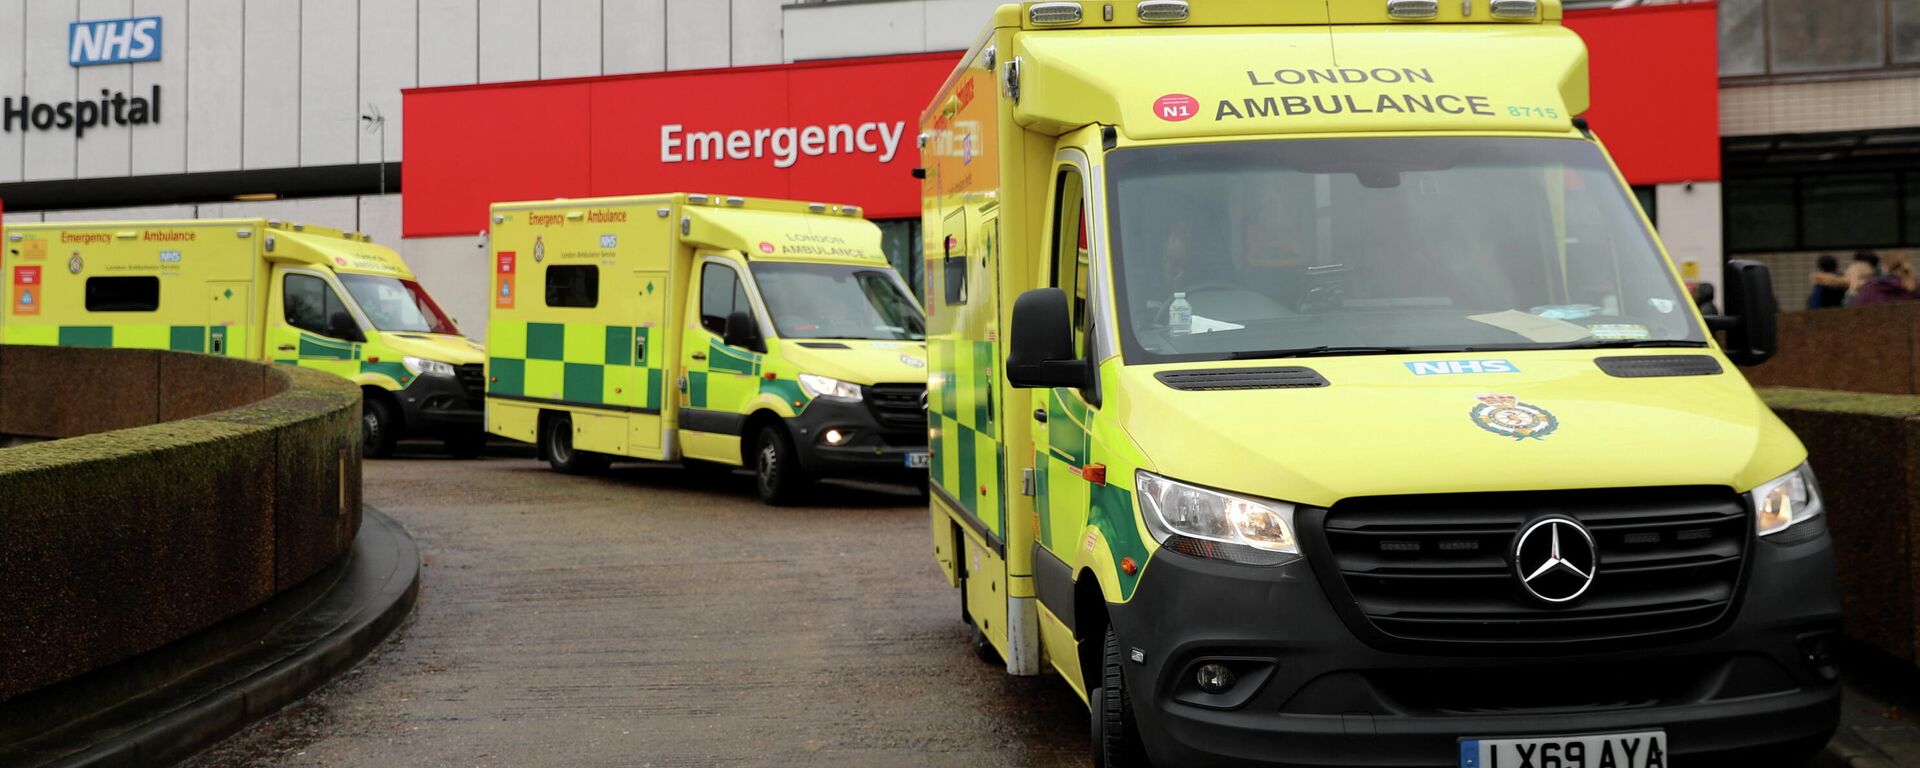 Ambulances are seen in front of St Thomas' Hospital as the spread of the coronavirus disease (COVID-19) continues, in London, Britain, December 12, 2021 - Sputnik International, 1920, 18.12.2021